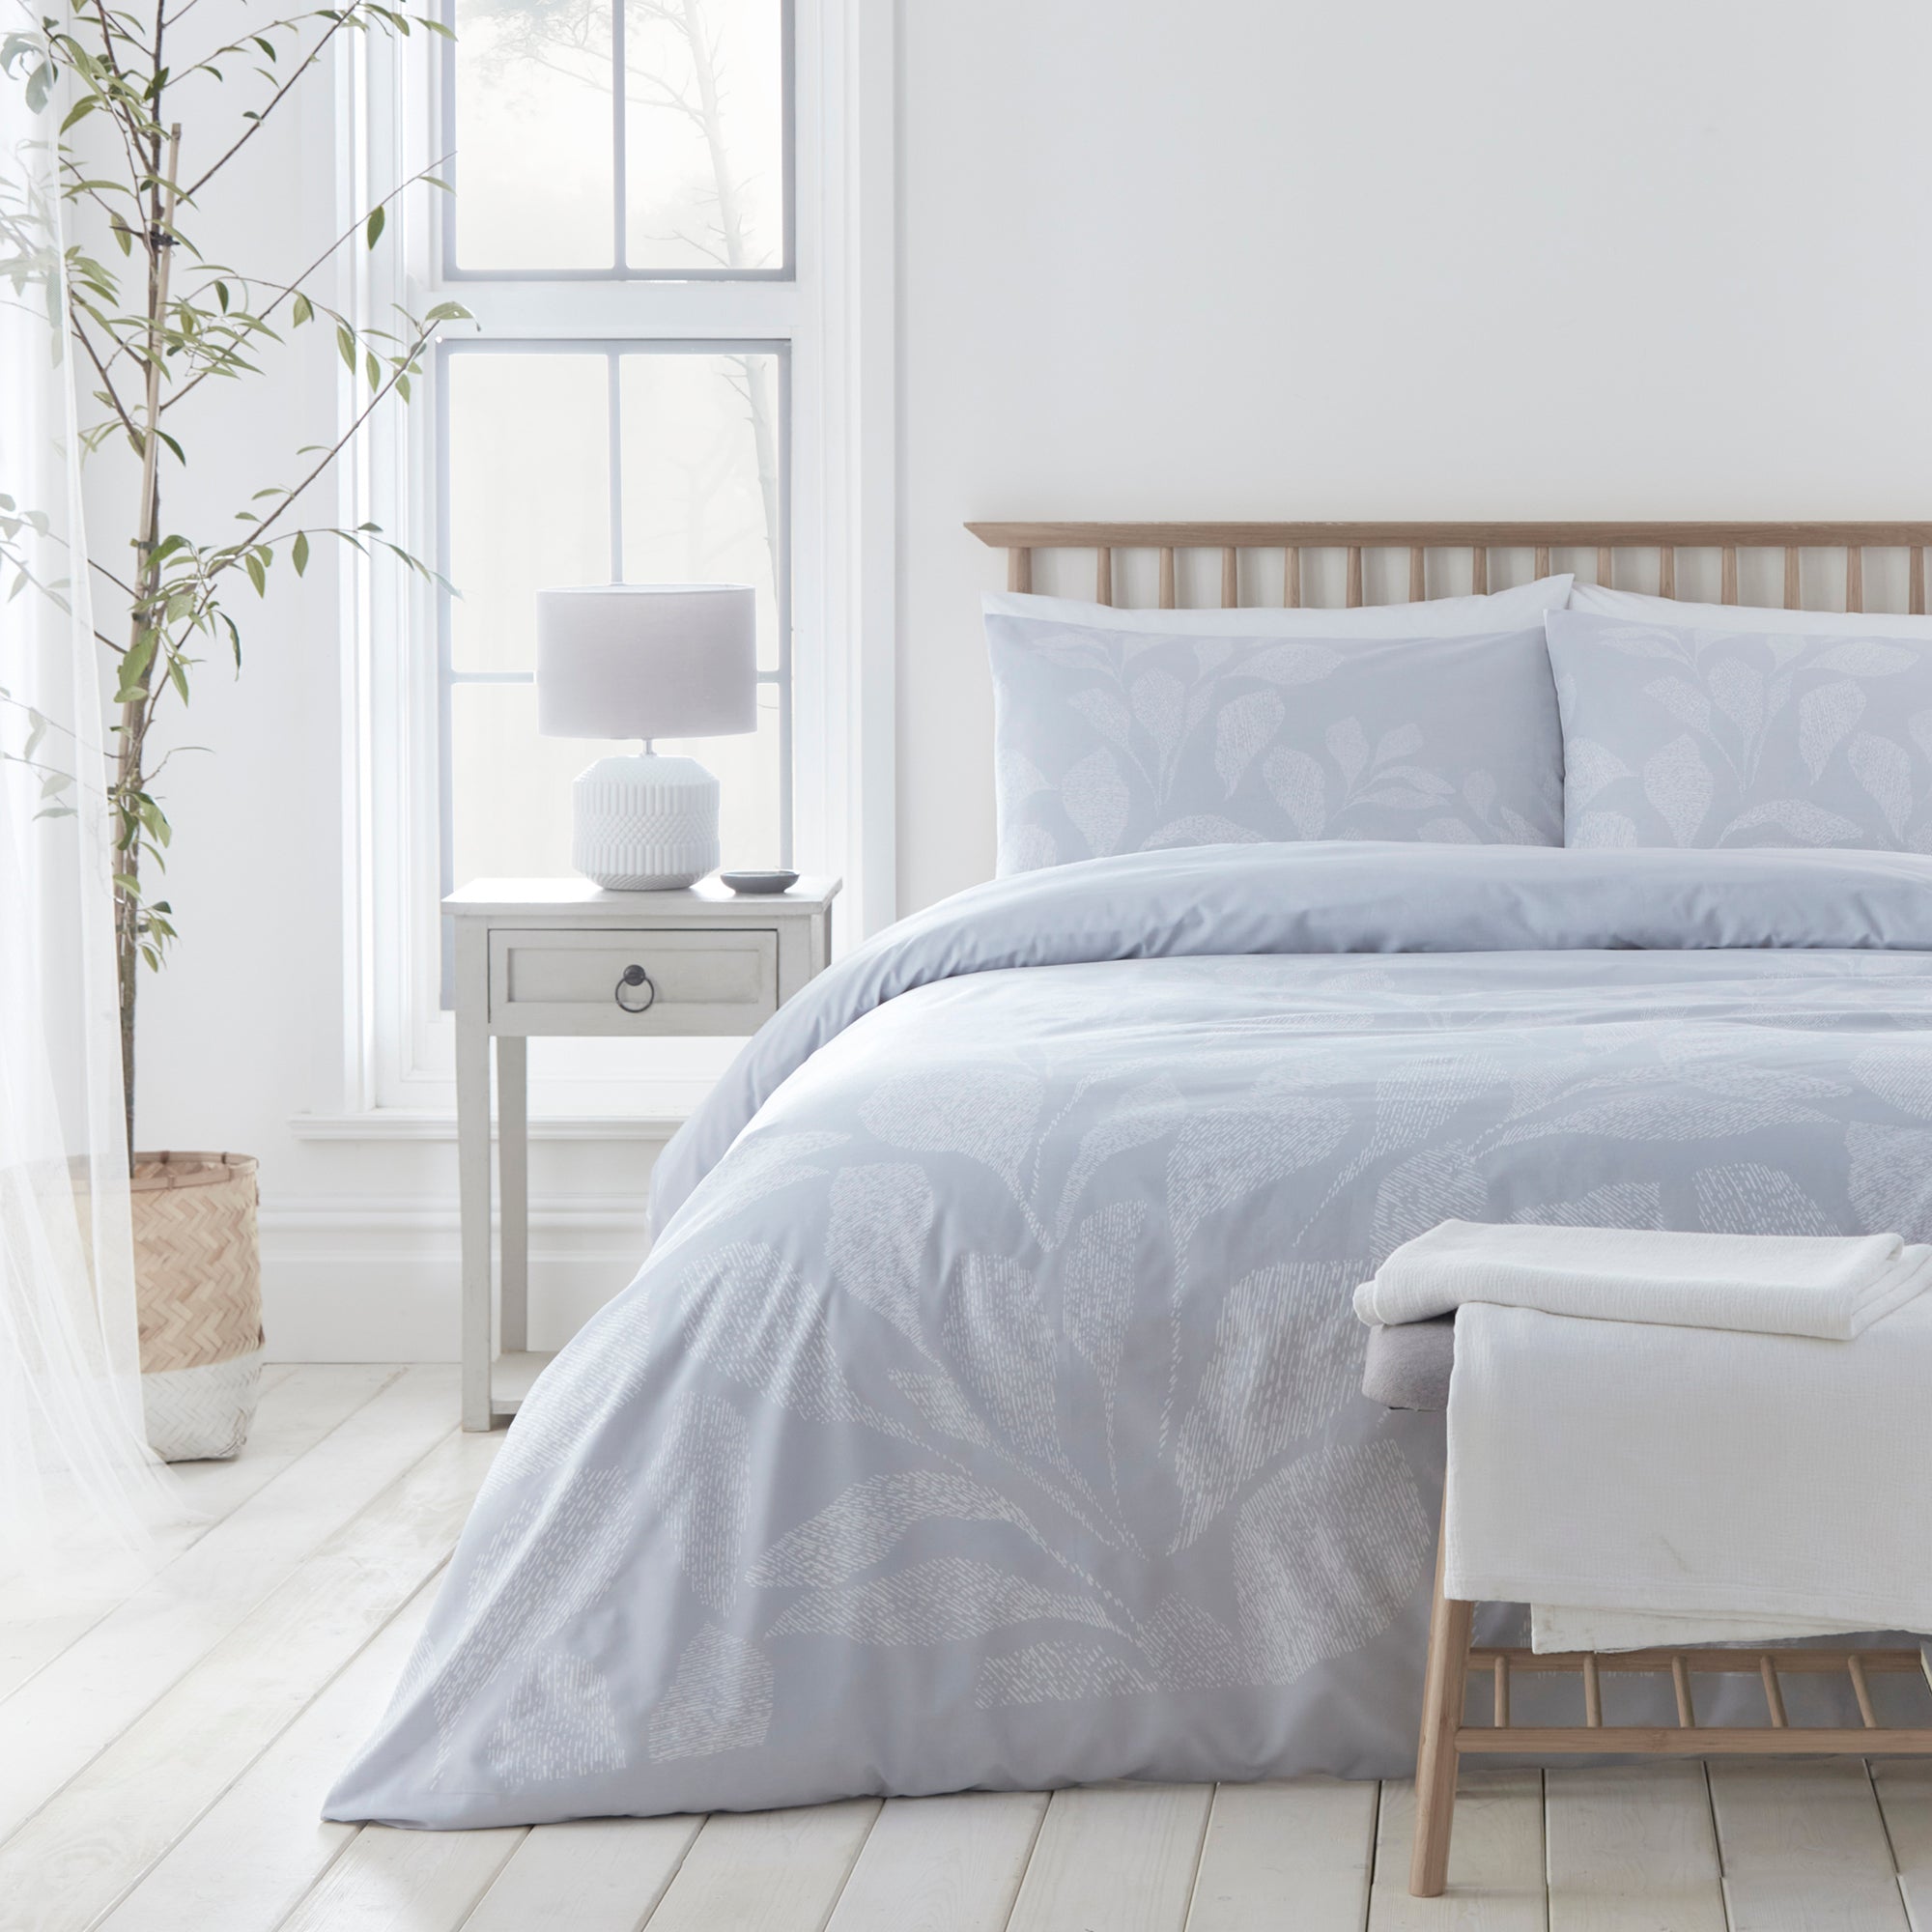 Textured Leaf - Eco-Friendly Duvet Cover Set in Silver by Drift Home